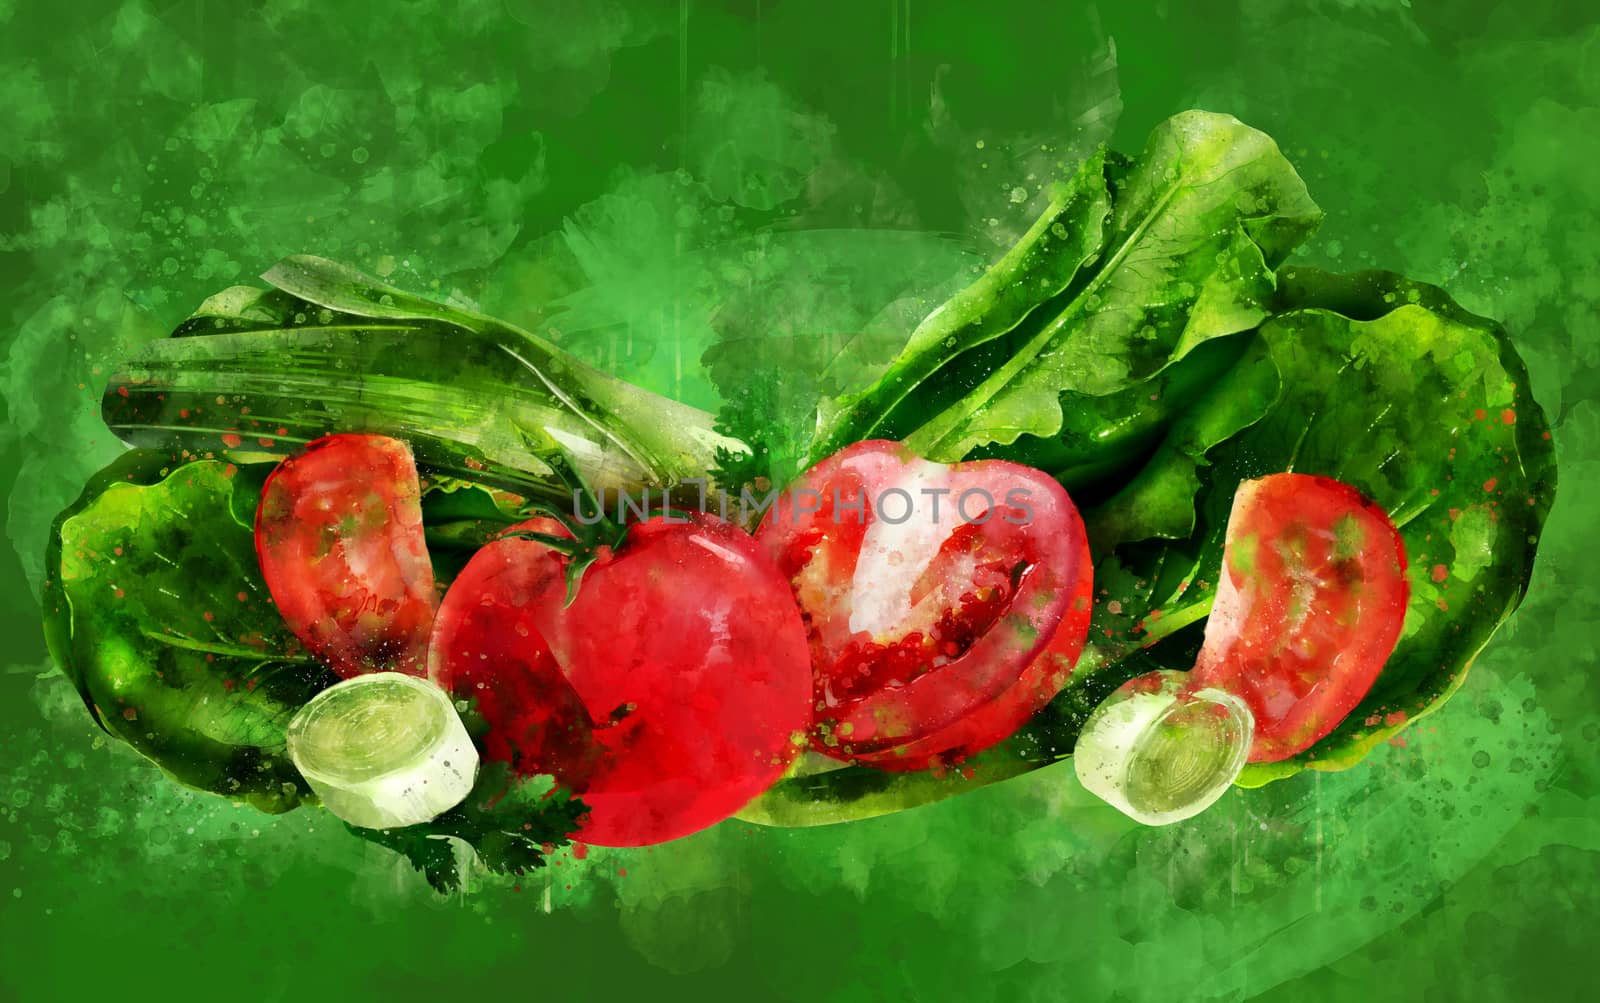 Tomato, cucumber and salad hand-painted illustration on a green background